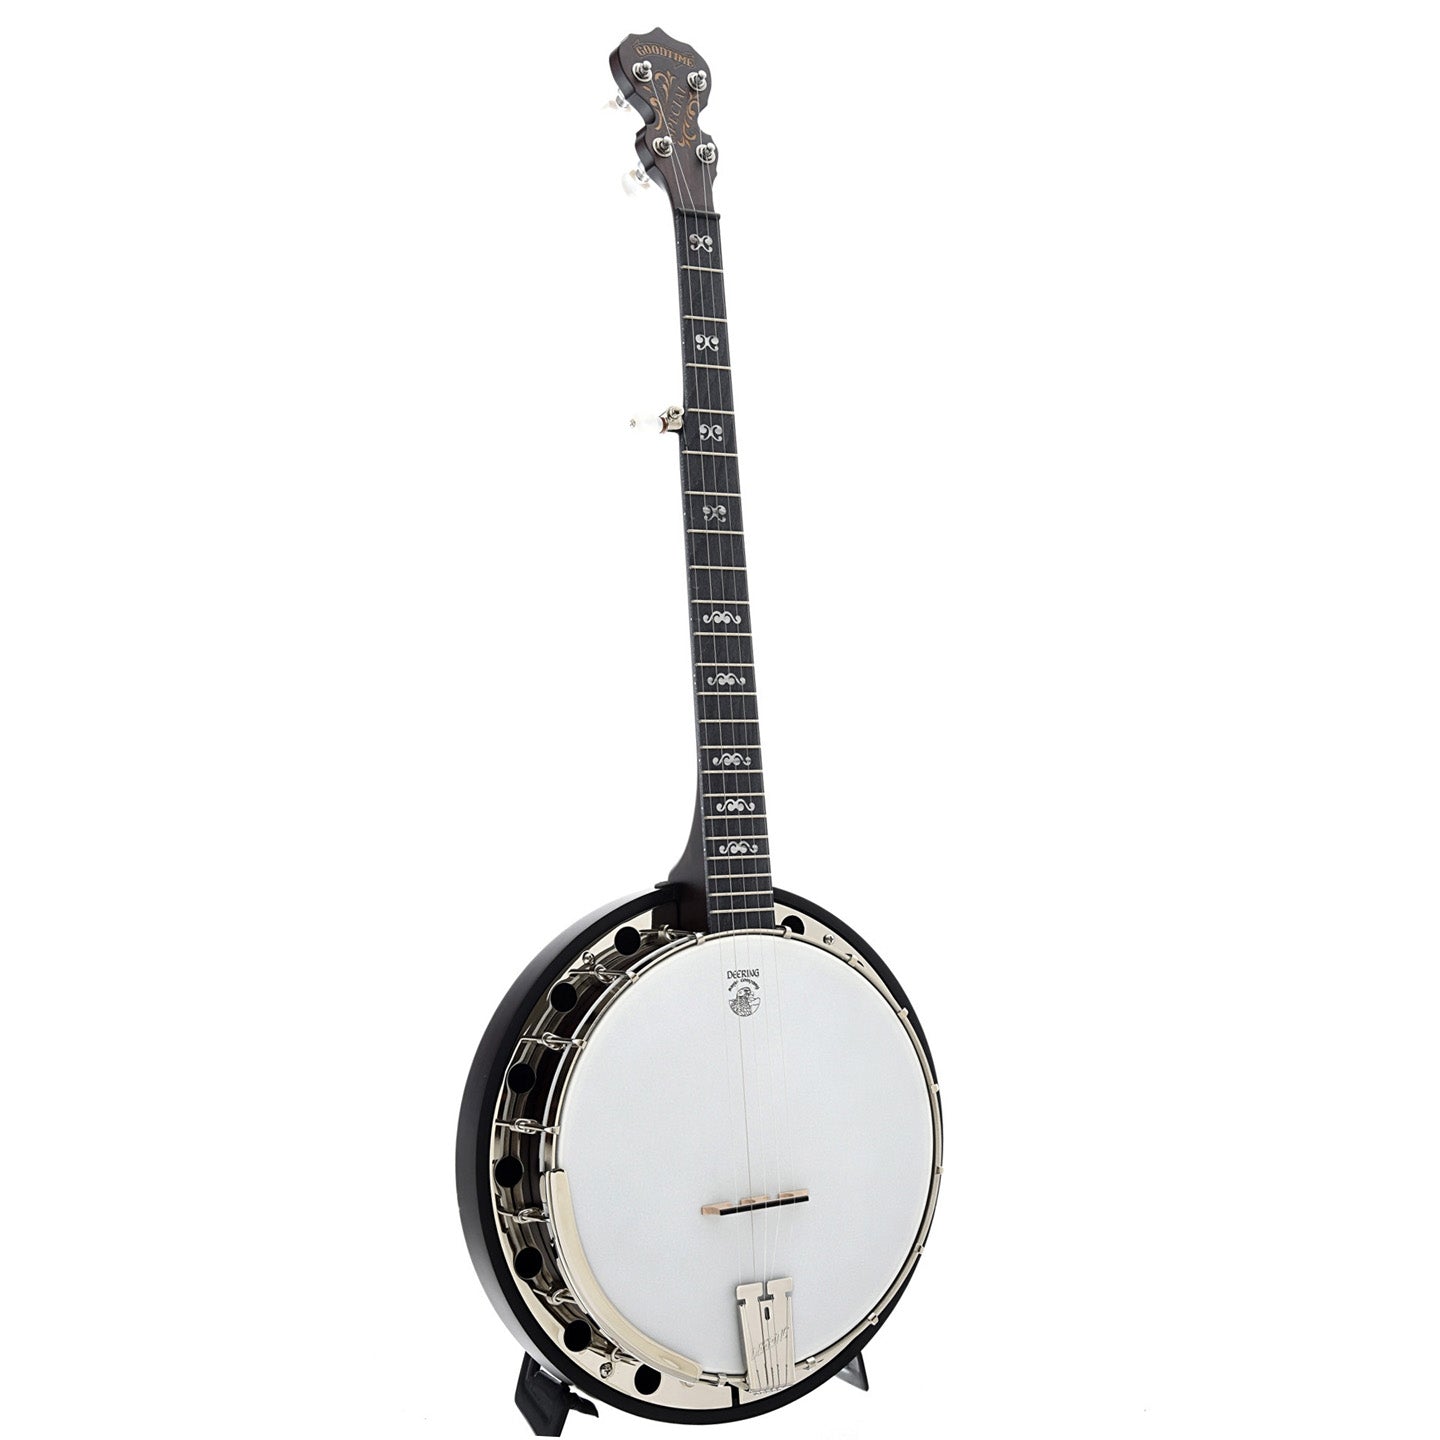 Full Front and Side of Deering Artisan Goodtime Special Resonator Banjo